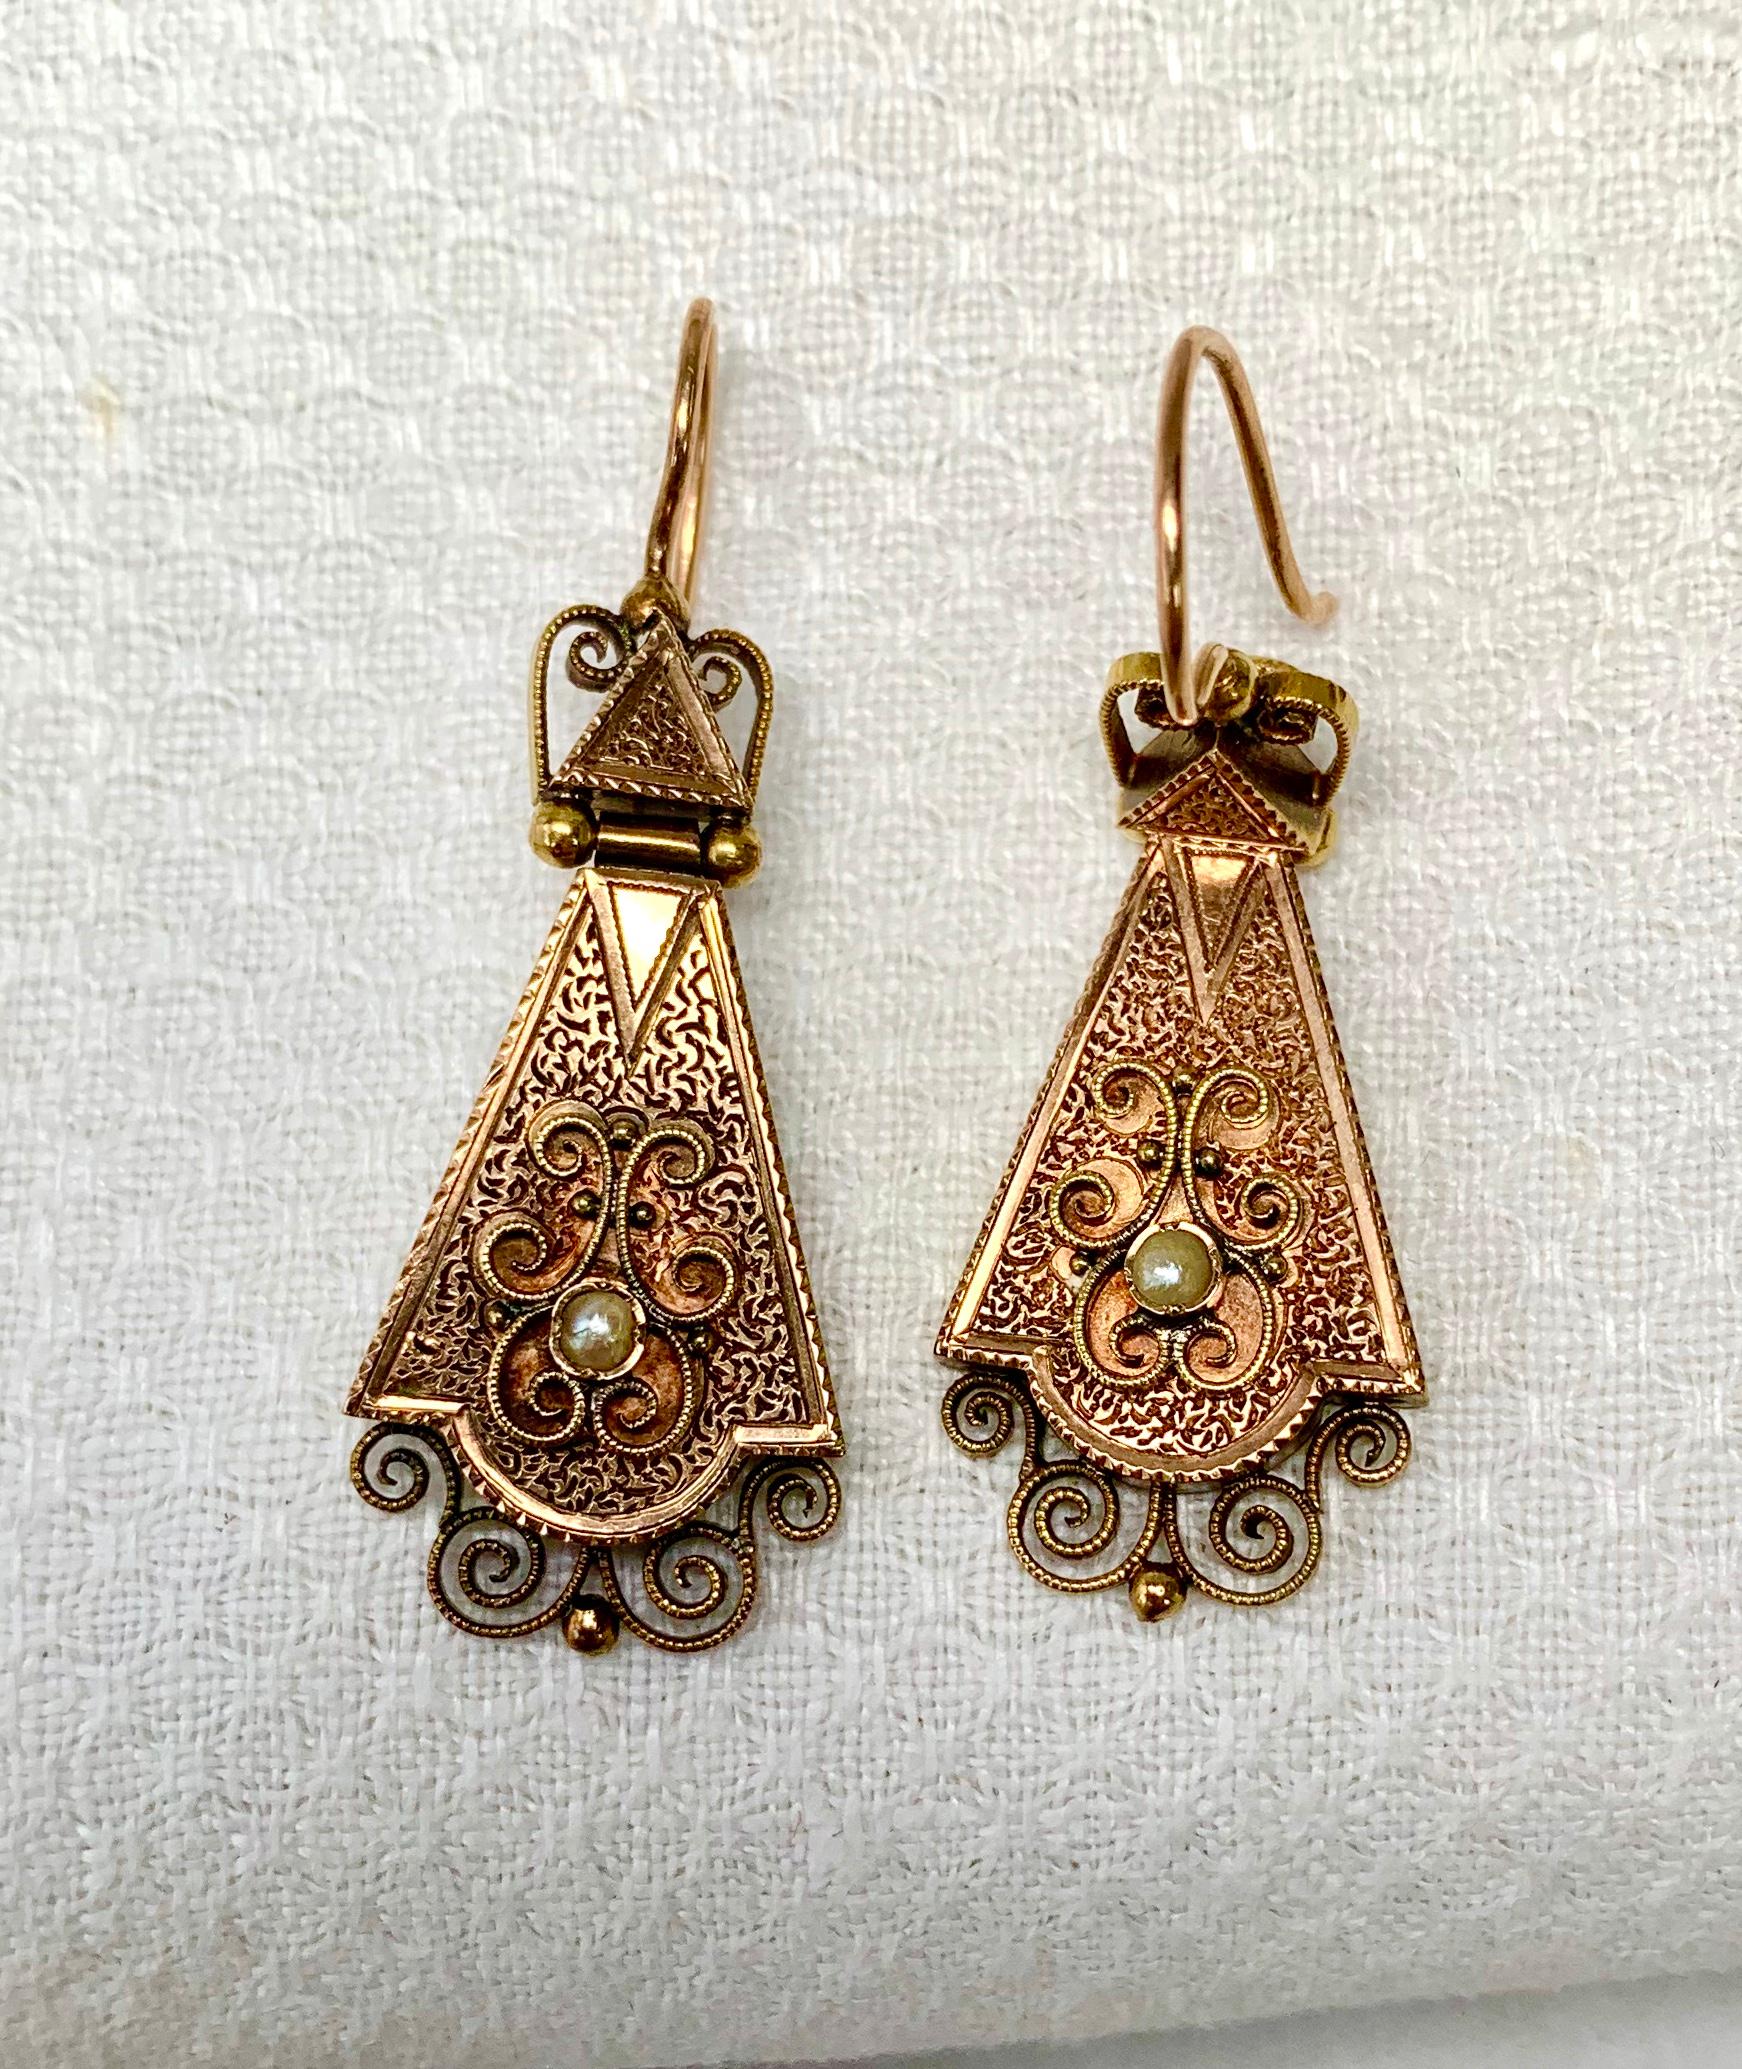 A spectacular pair of early Antique Victorian 14 Karat Gold Articulated Pendant Earrings with stunning engraving throughout.  Further enhanced with applied filigree work with pearl accents.  The earrings are articulated - the top triangle is hinged